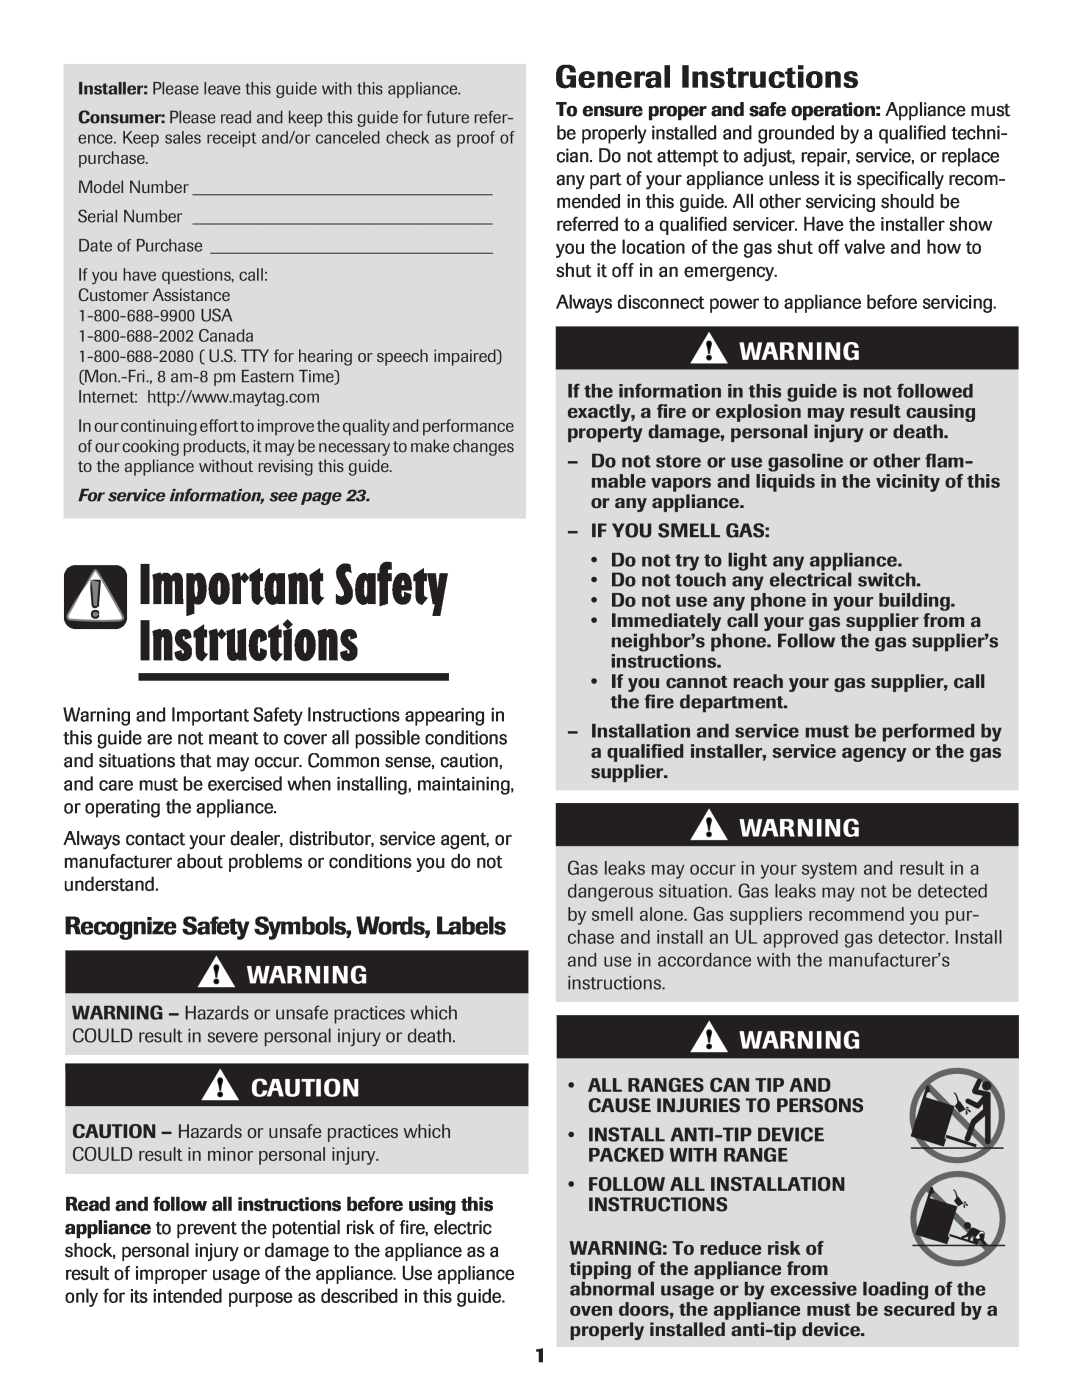 Maytag MGR6751BDW manual Important Safety, General Instructions, Recognize Safety Symbols, Words, Labels 